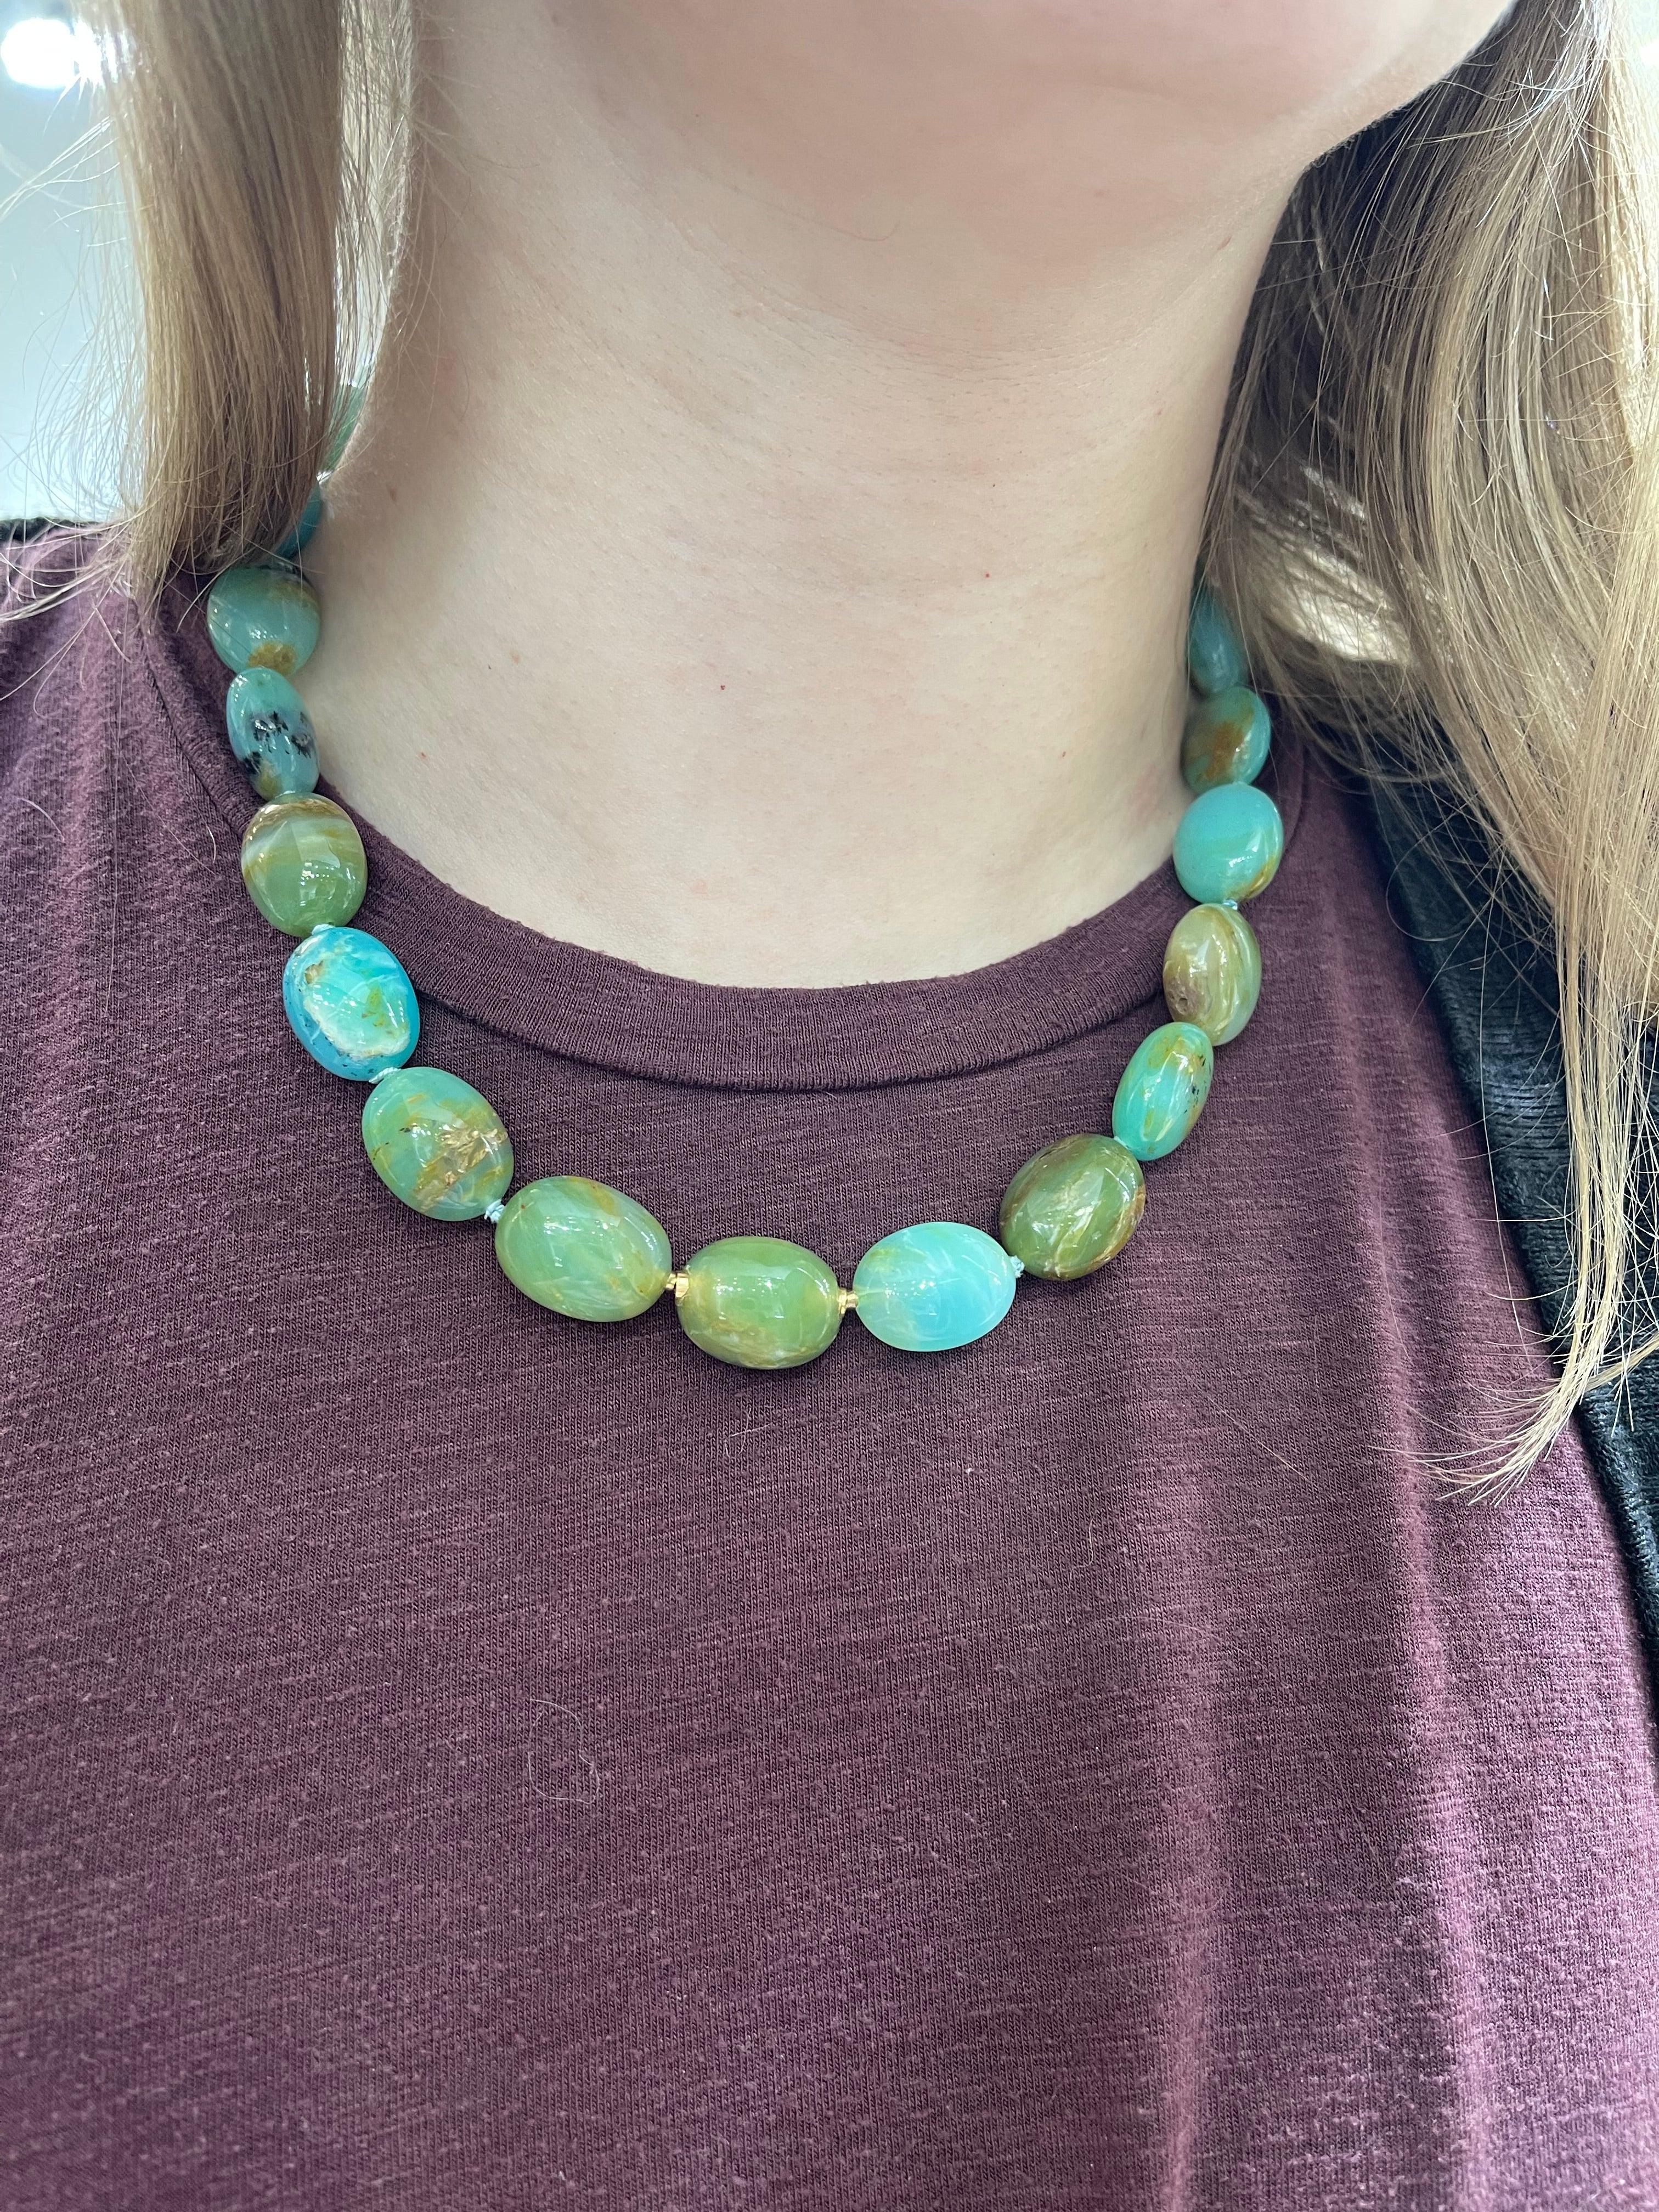 Modullyn Peruvian Opal Necklace In New Condition For Sale In Greenville, SC